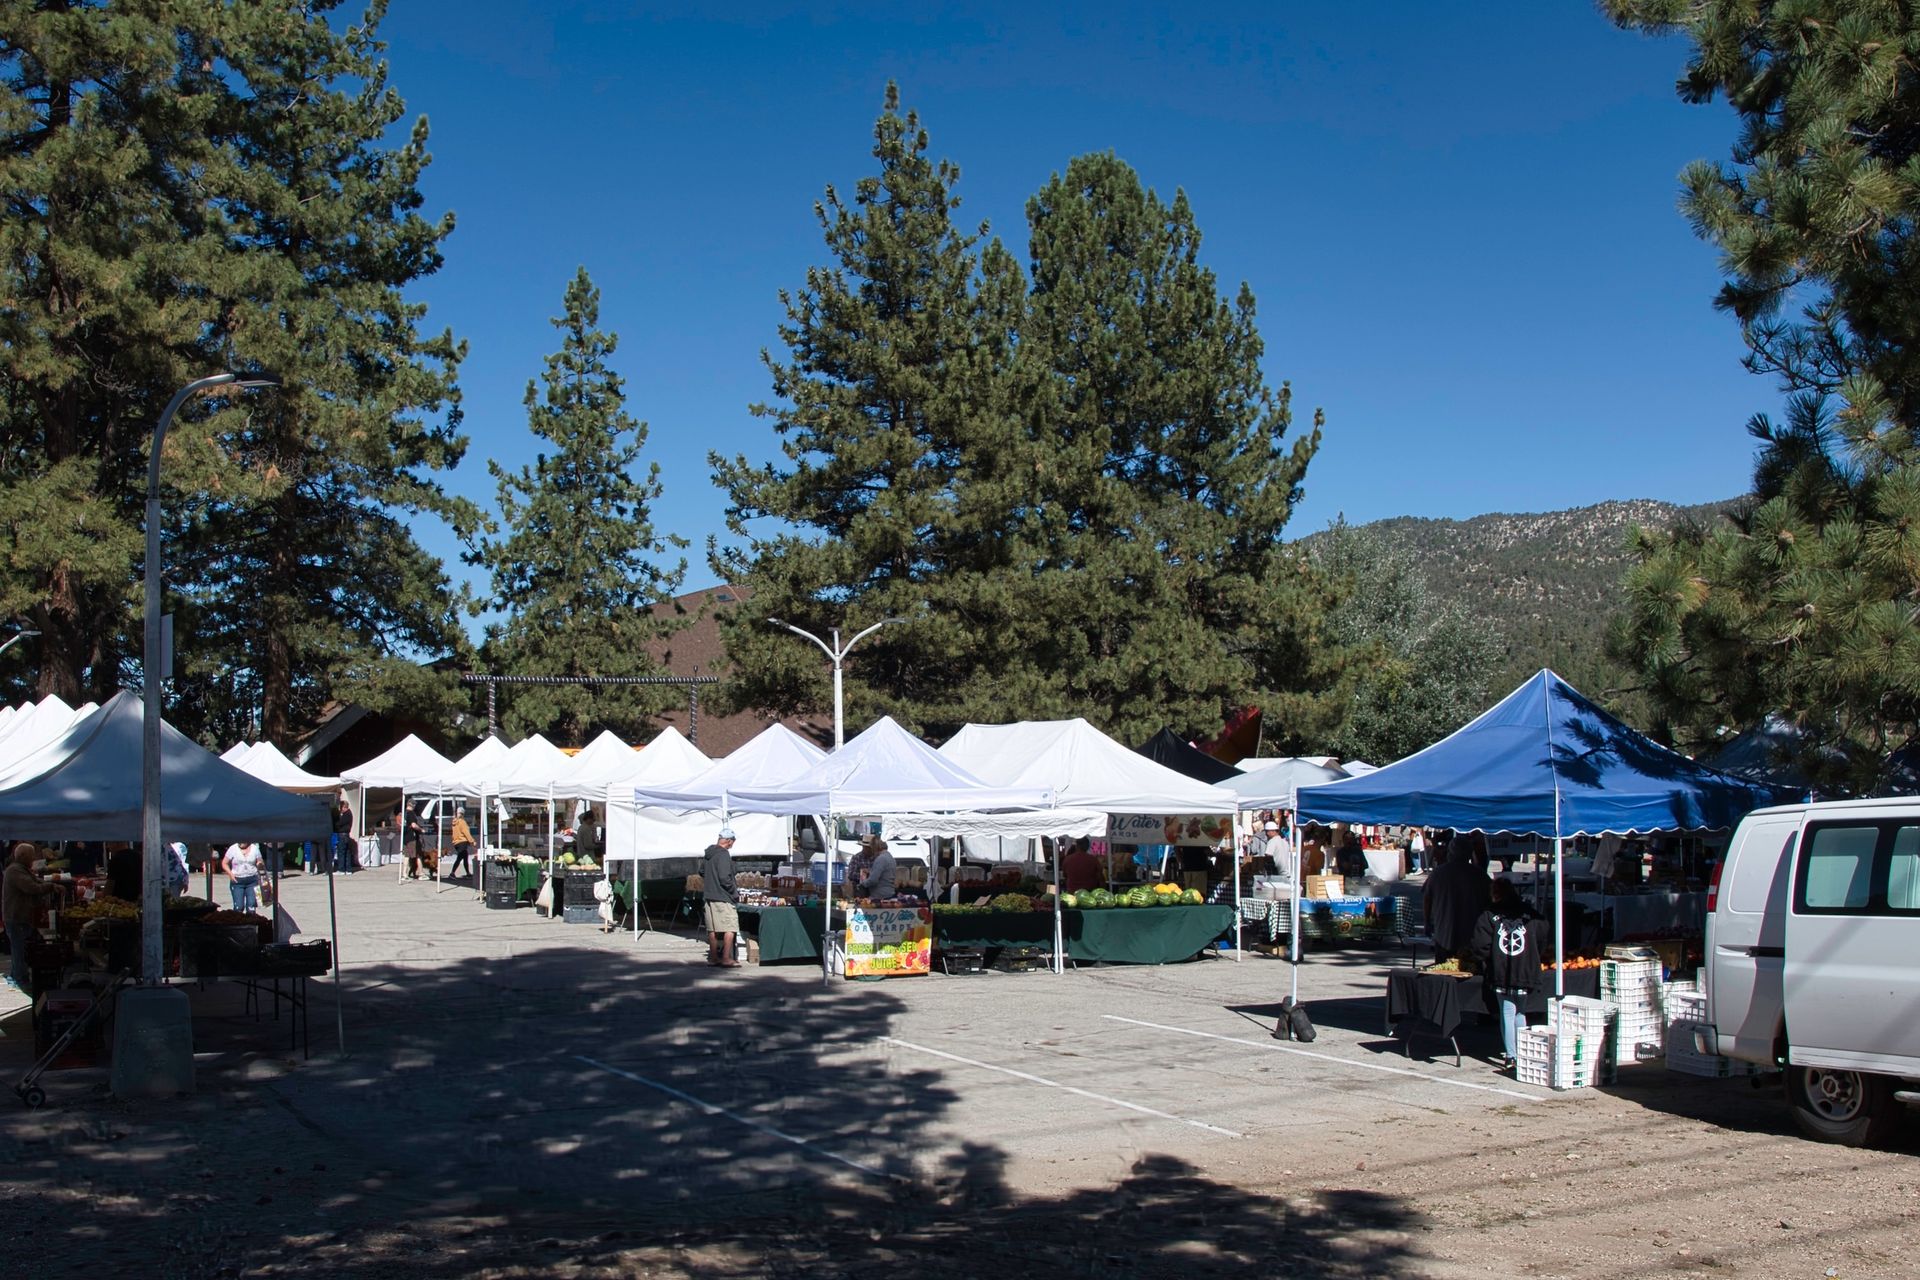 Big Bear Farmers Market: What You Need to Know